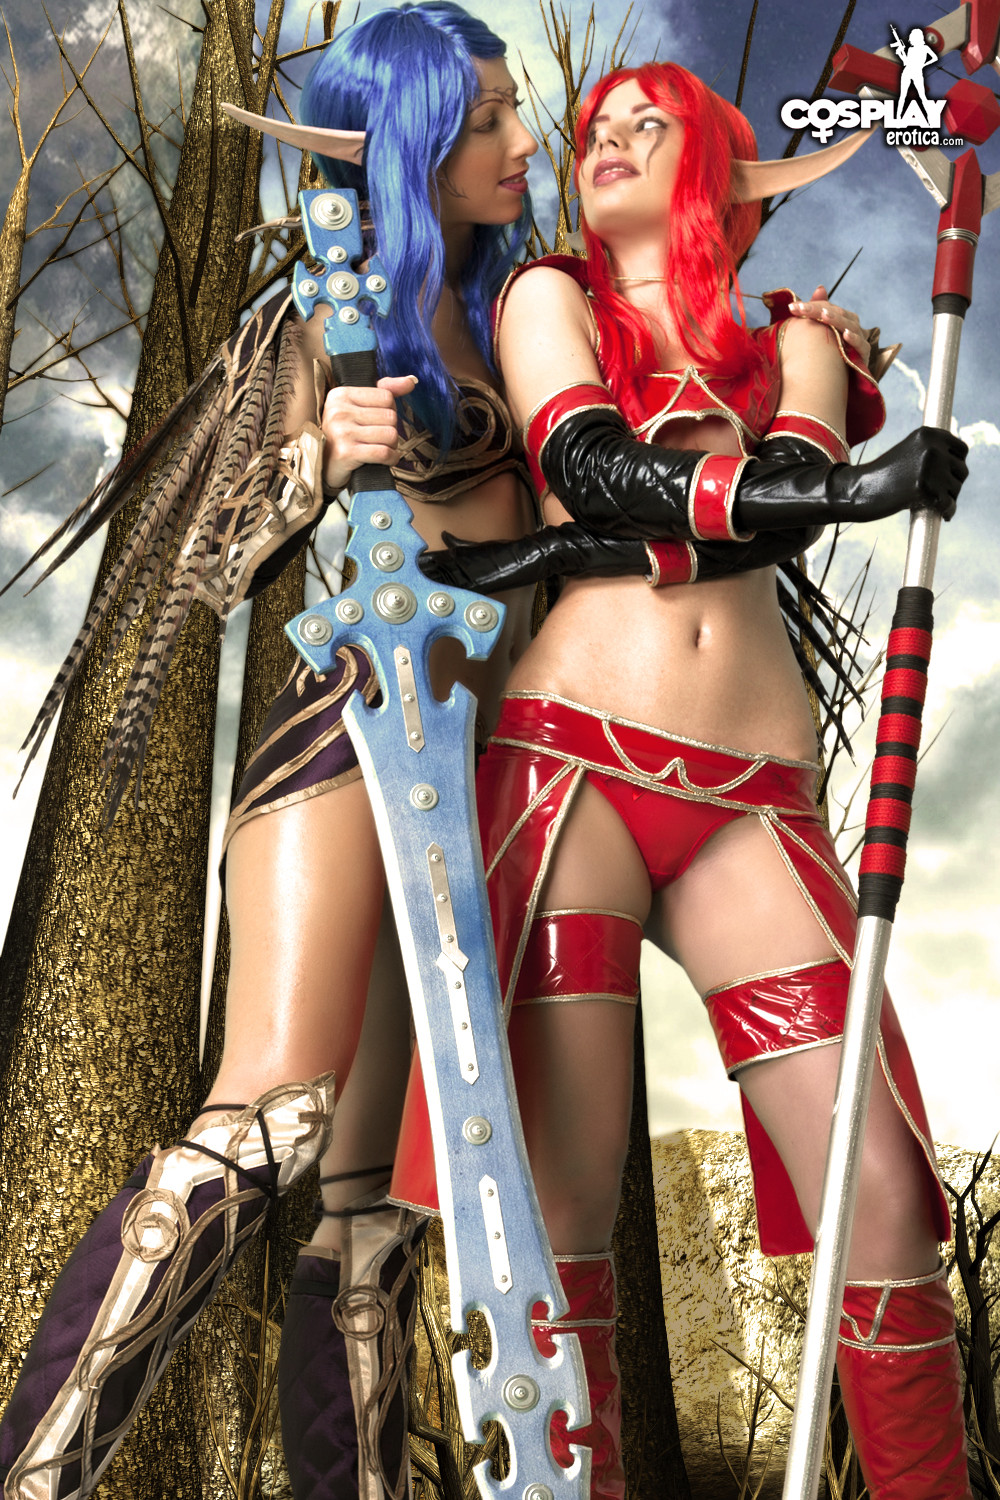 Angela And Marylin In Cosplay Lesbian Fun In A Warcraft Fantasy World Wearing Wi